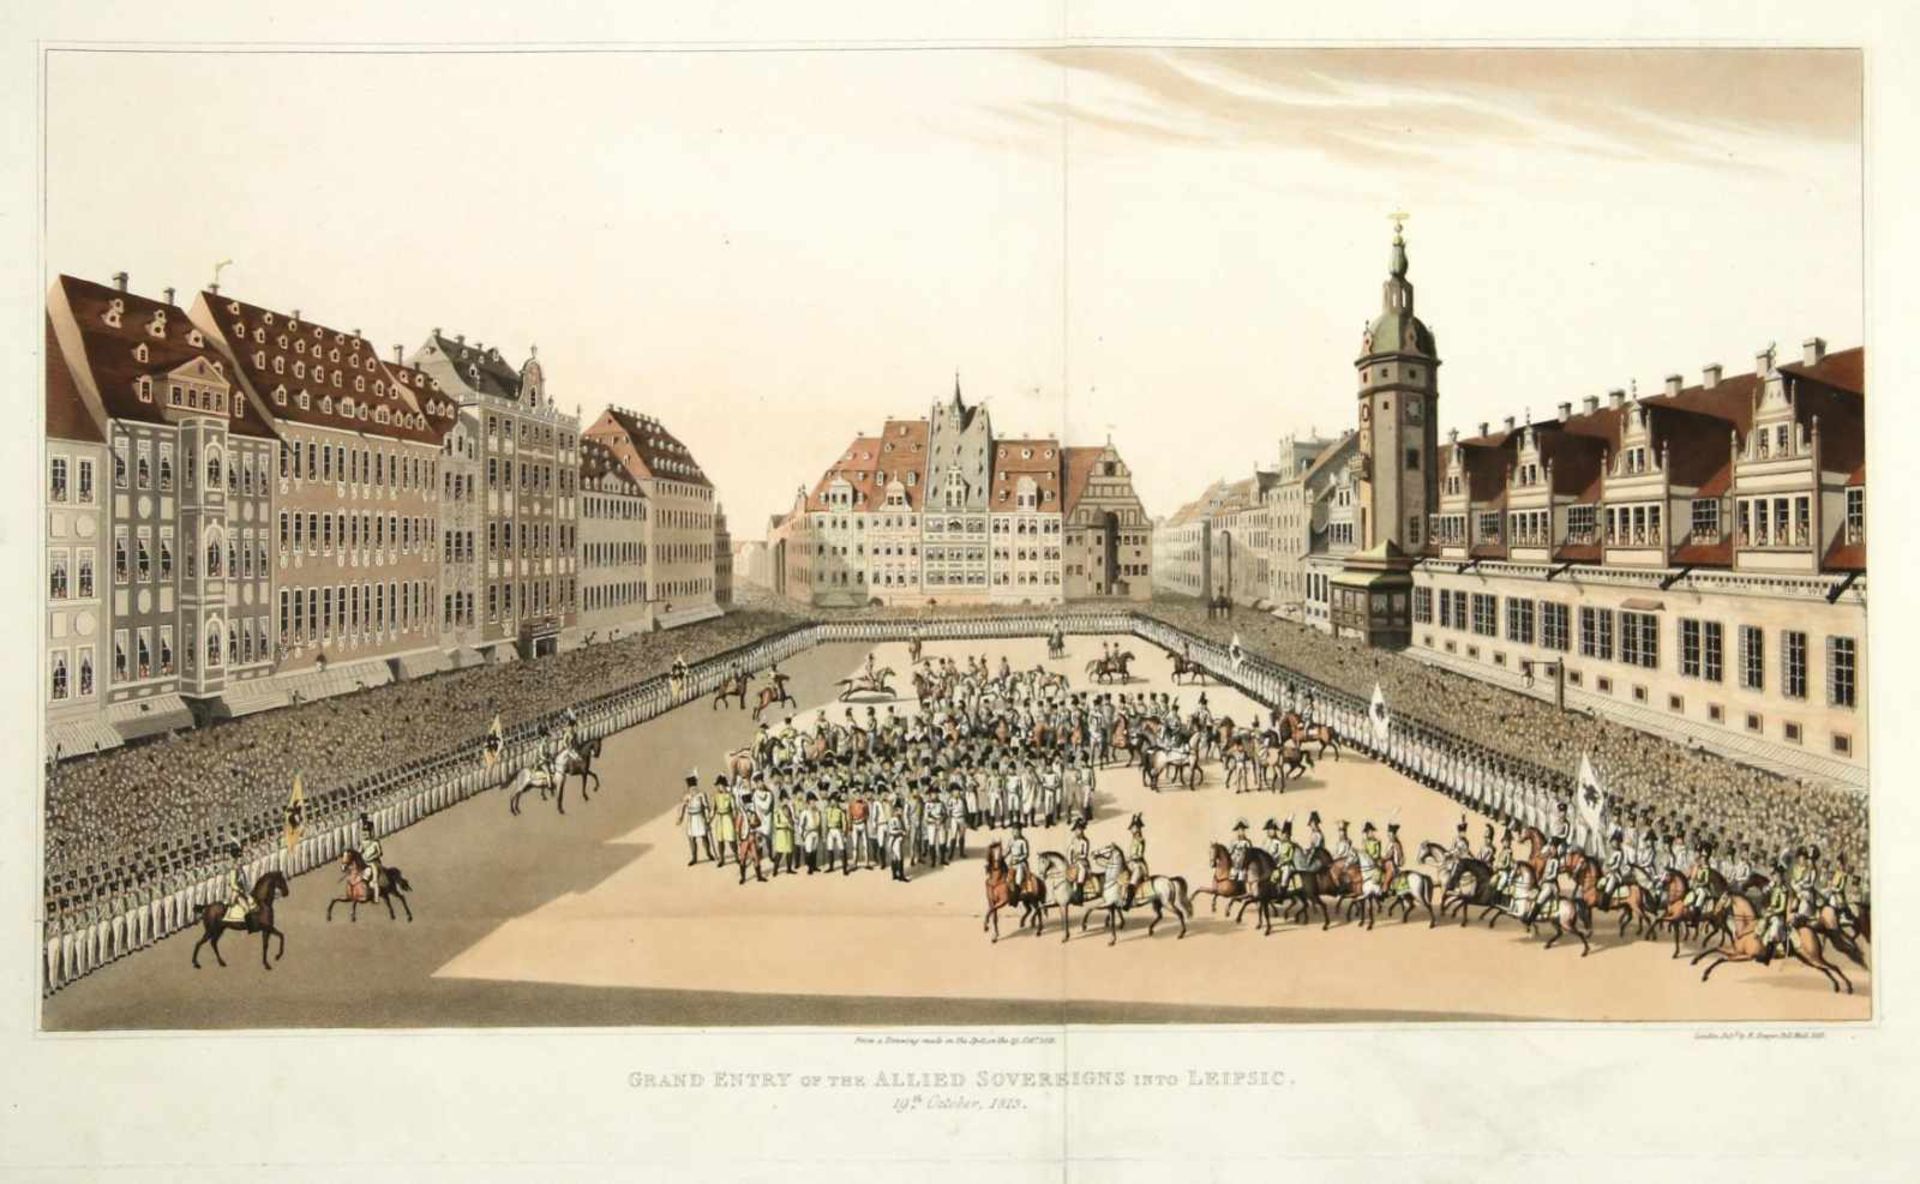 Sachsen. - Leipzig. - Grand Entry of the Allied Sovereigns into Leipsic. 19th. October, 1813.